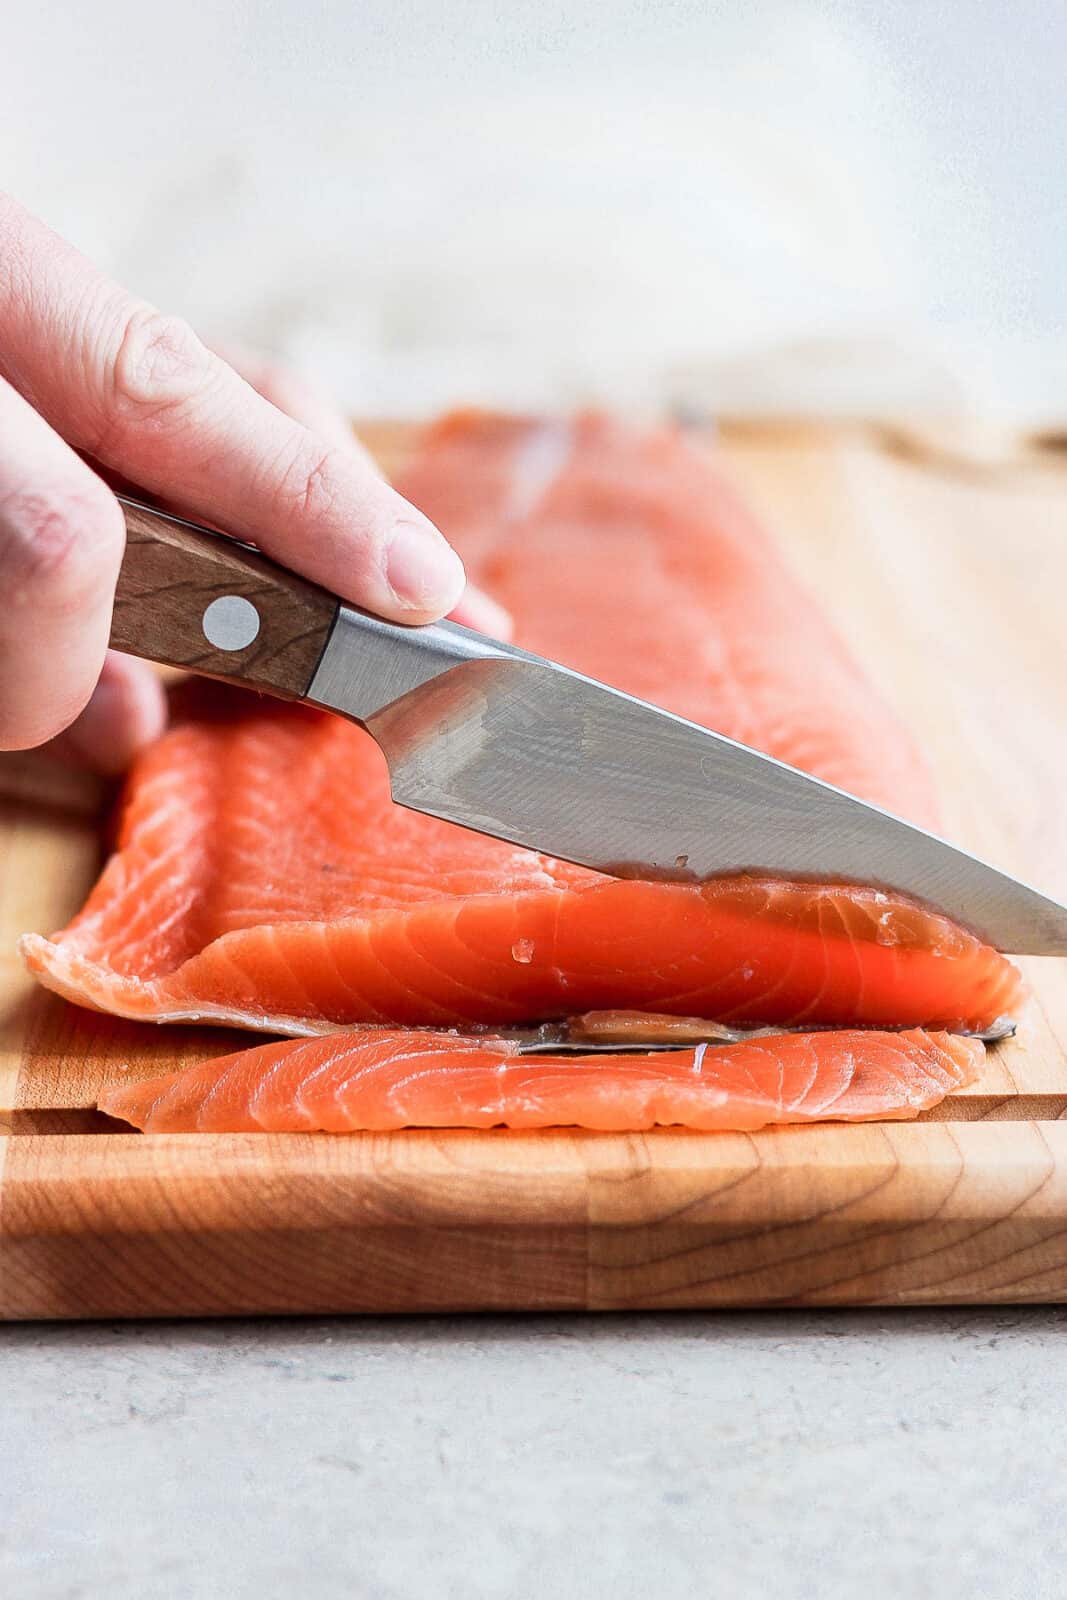 A large piece of lox being cut into very thin slices.